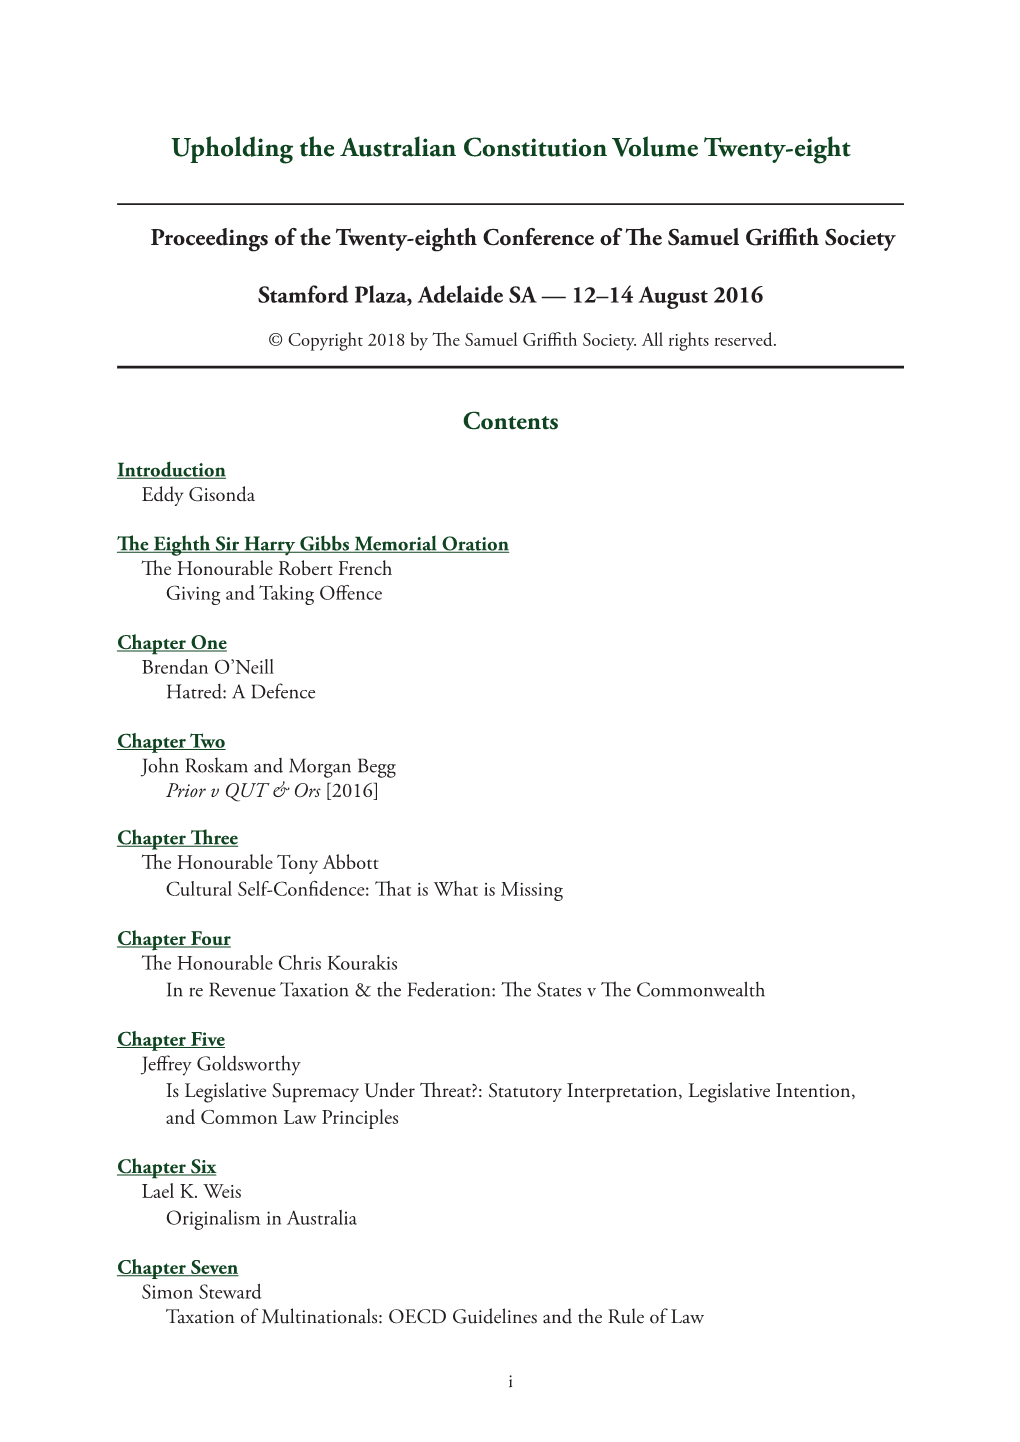 Proceedings of the Samuel Griffith Society, Volume 28